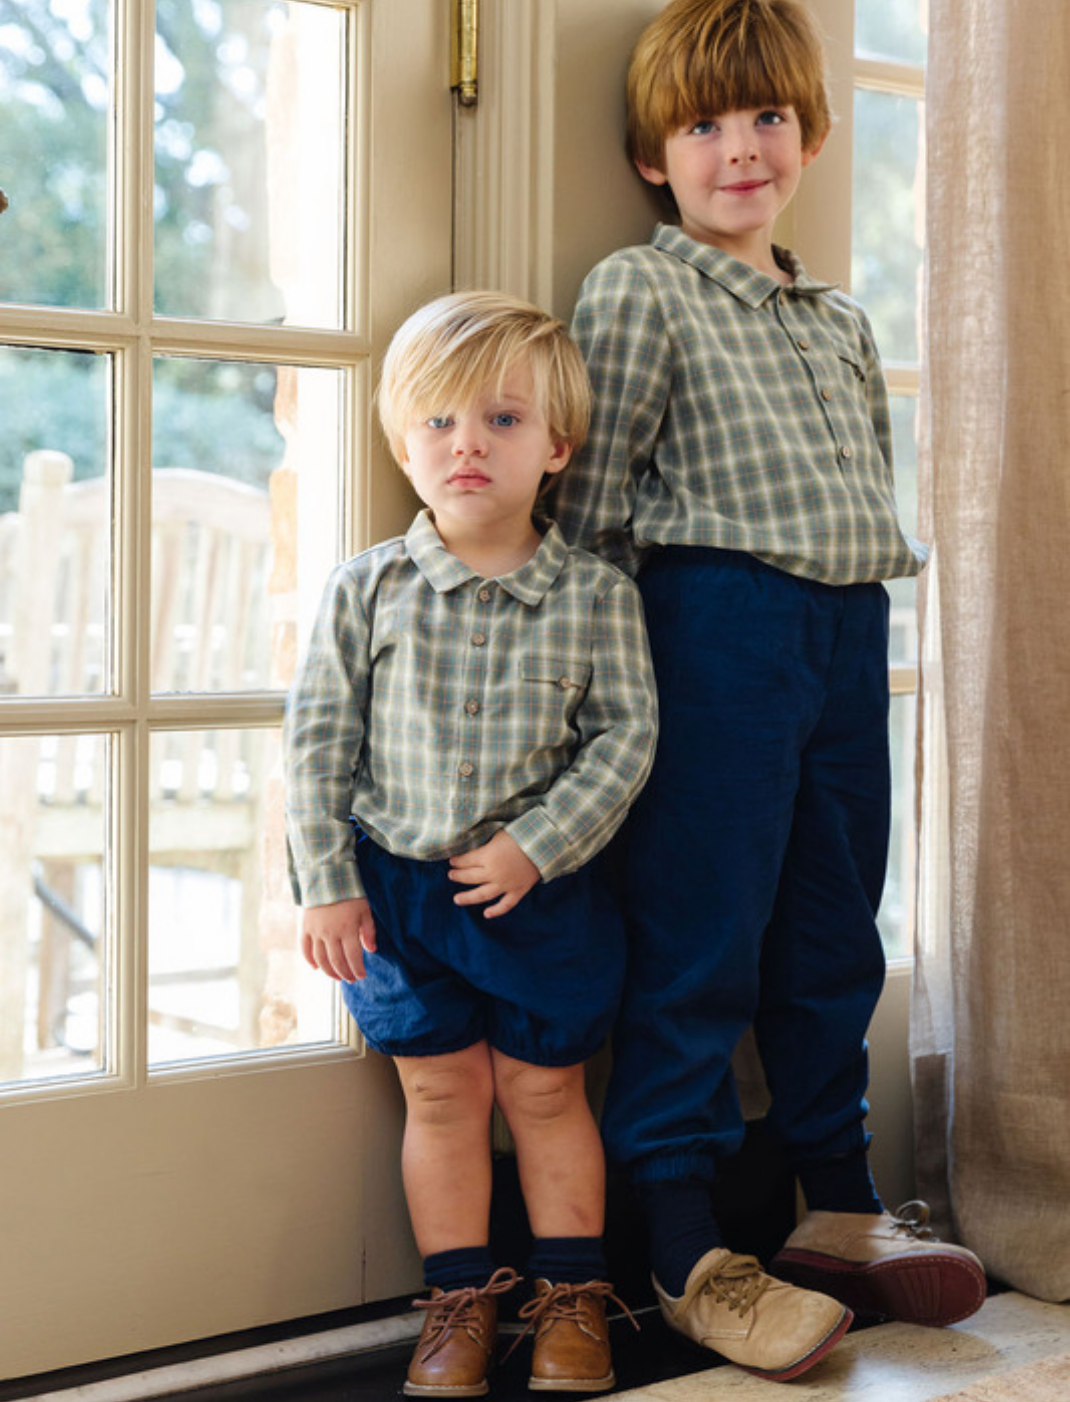 Two young boys leaning against a wall next to a windowed door inside. Both boys wearing a long sleeve checkered shirt and the older boy is wearing blue pants and the younger boy is wearing blue shorts.